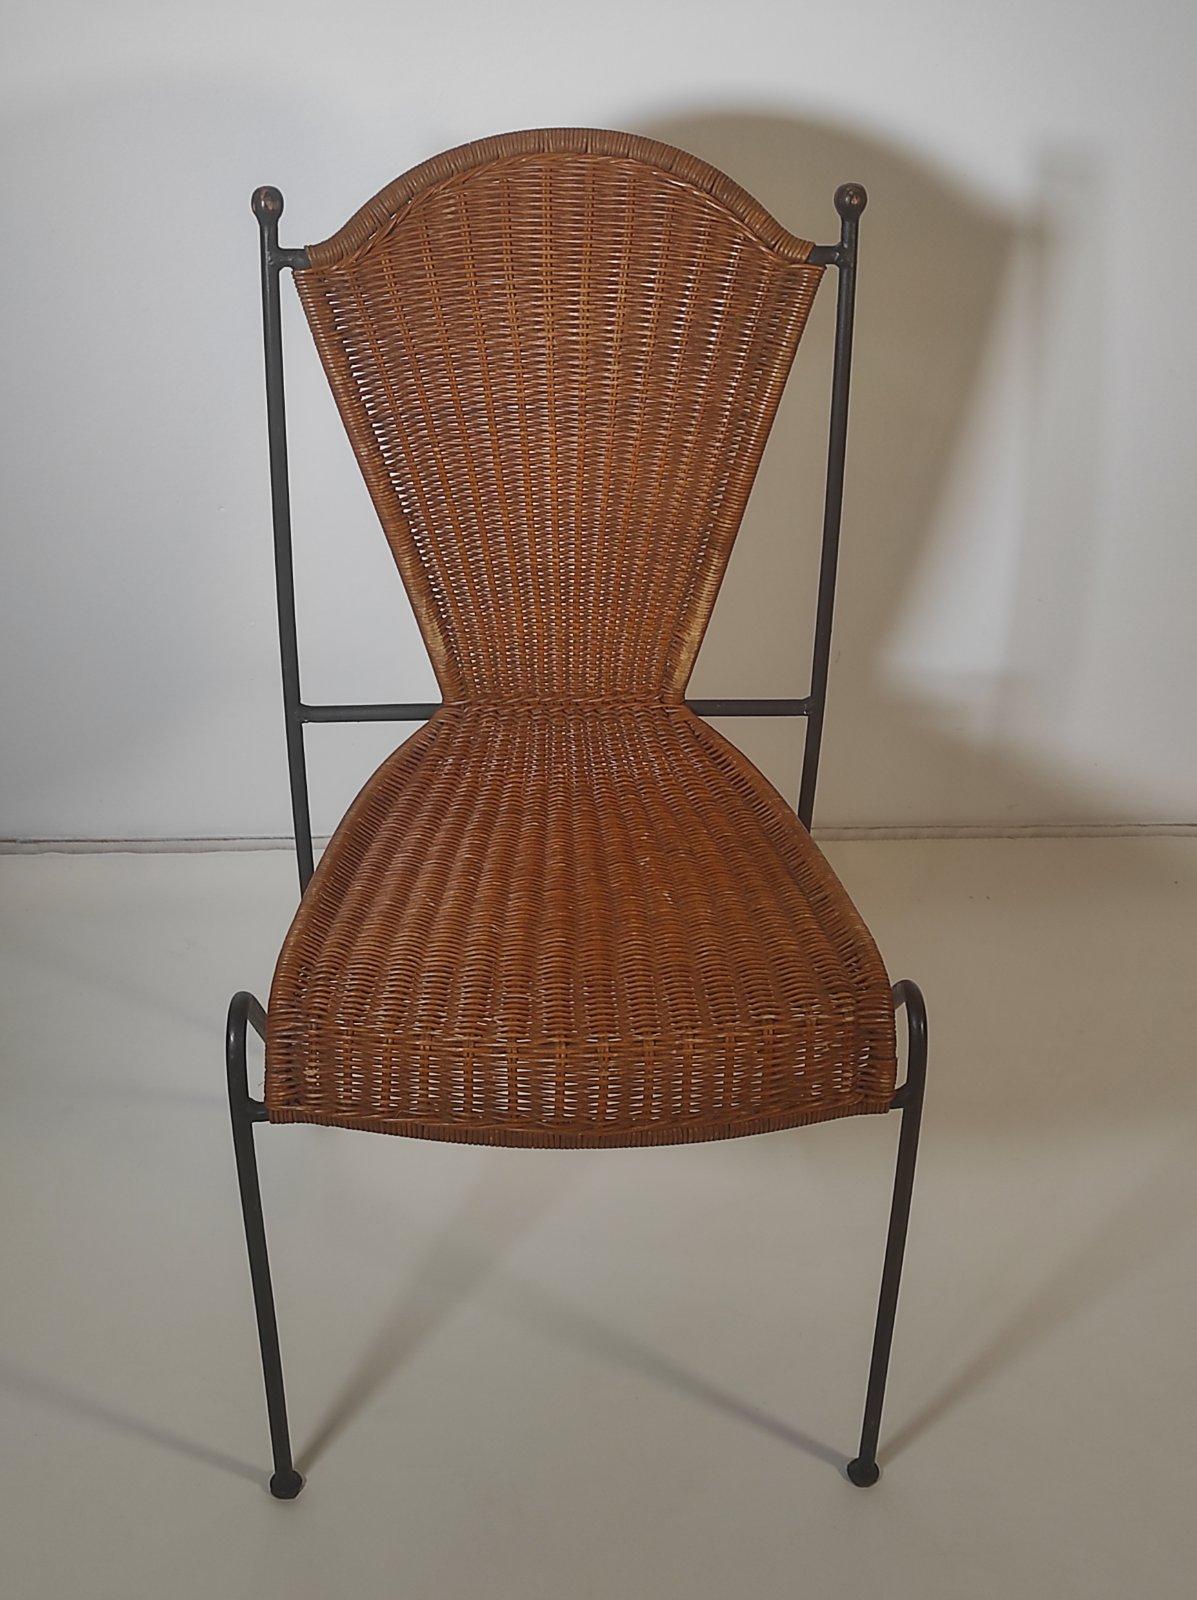 American Frederic Weinberg Wicker and Iron Chair 1950s